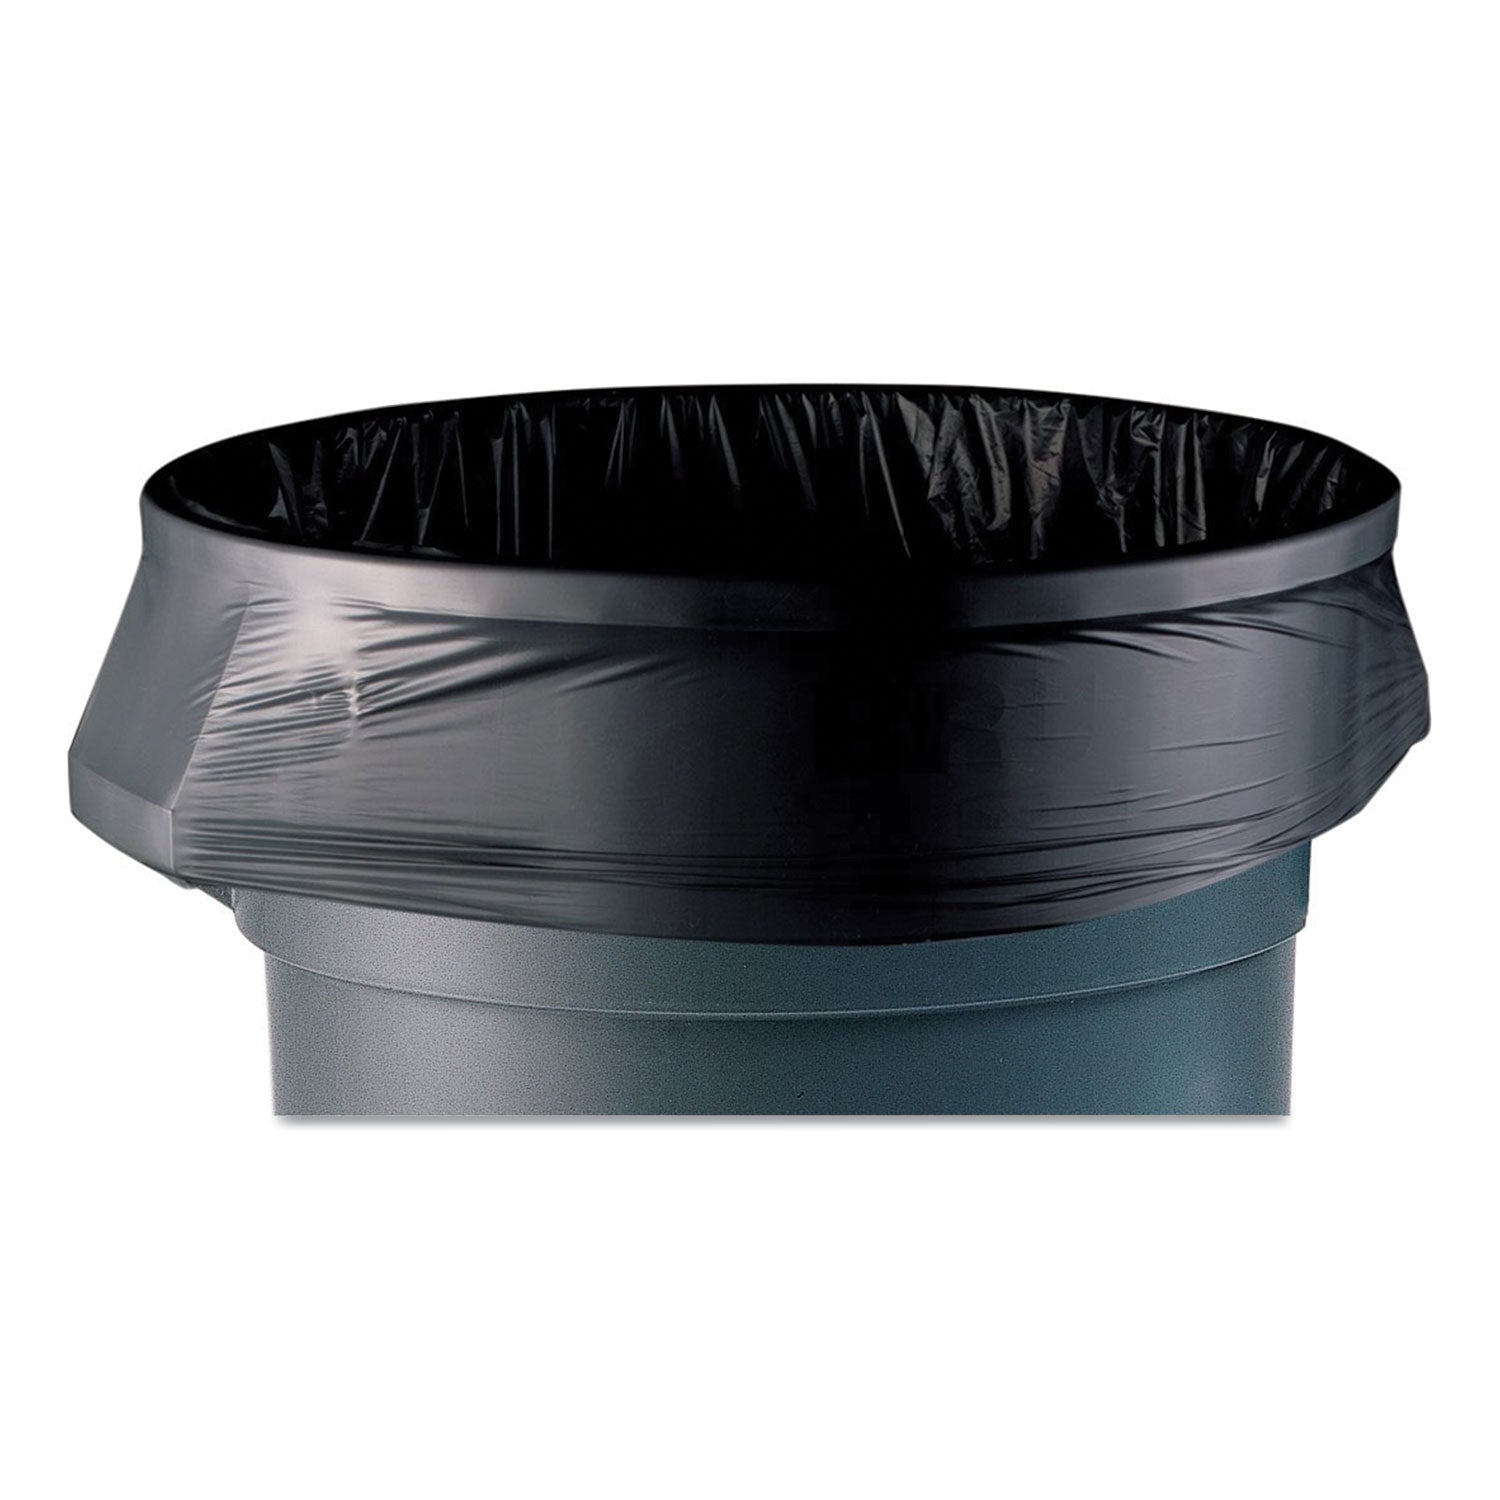 accufit-linear-low-density-can-liners-23-gal-09-mil-28-x-45-black-25-bags-roll-8-rolls-carton_cwz477567 - 1